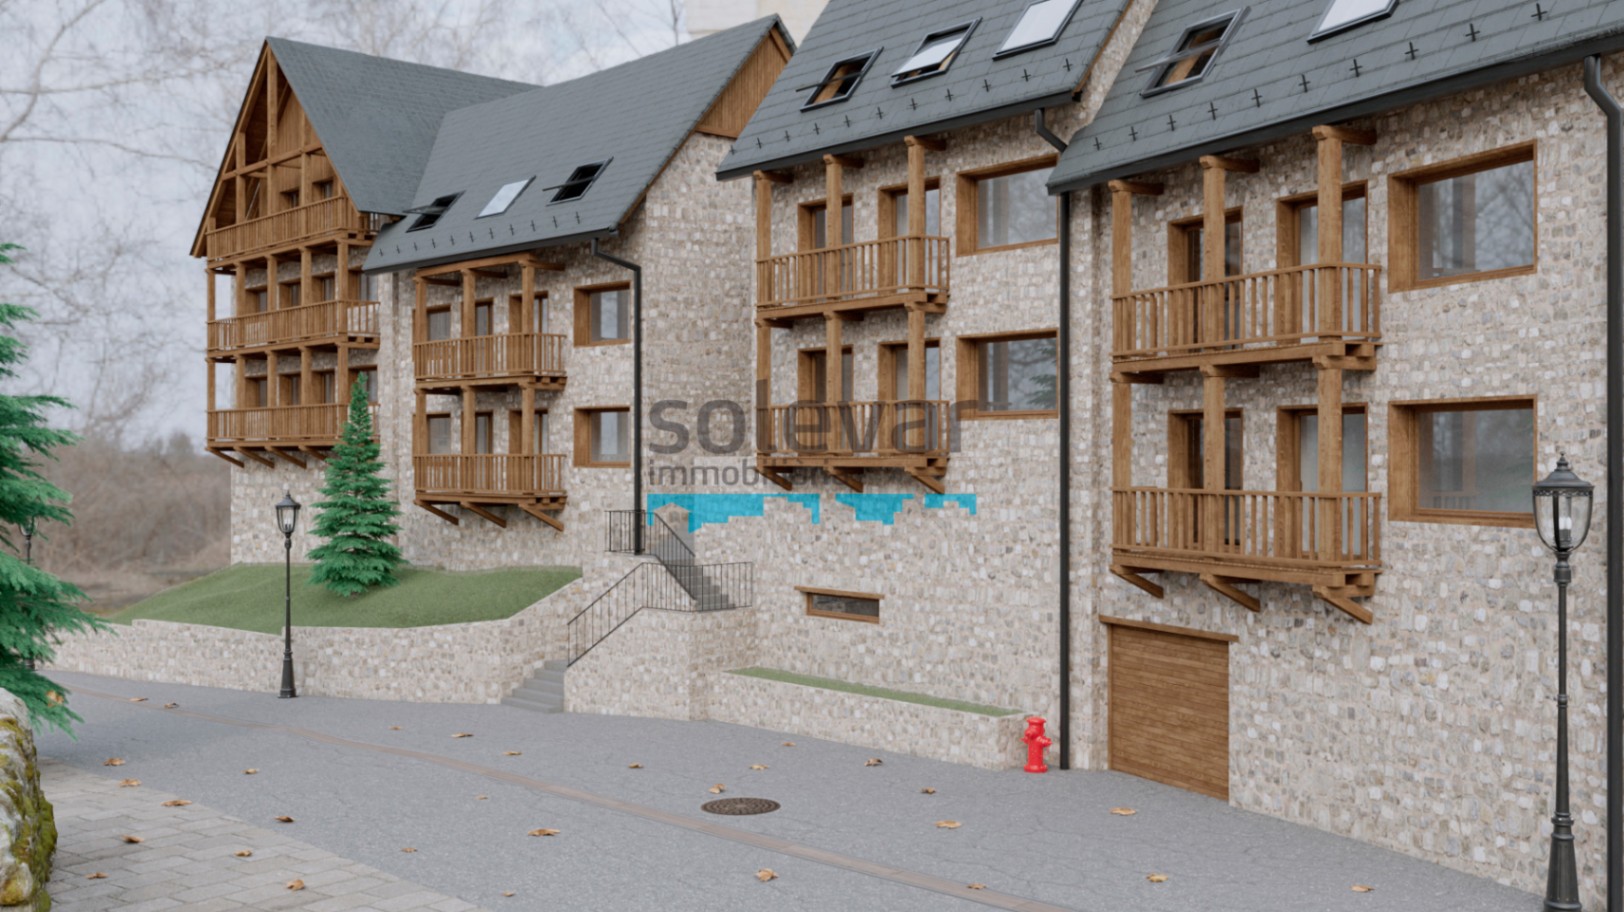 TOWNHOUSE WITH PARKING AND STORAGE ROOM IN THE ARAN VALLEY